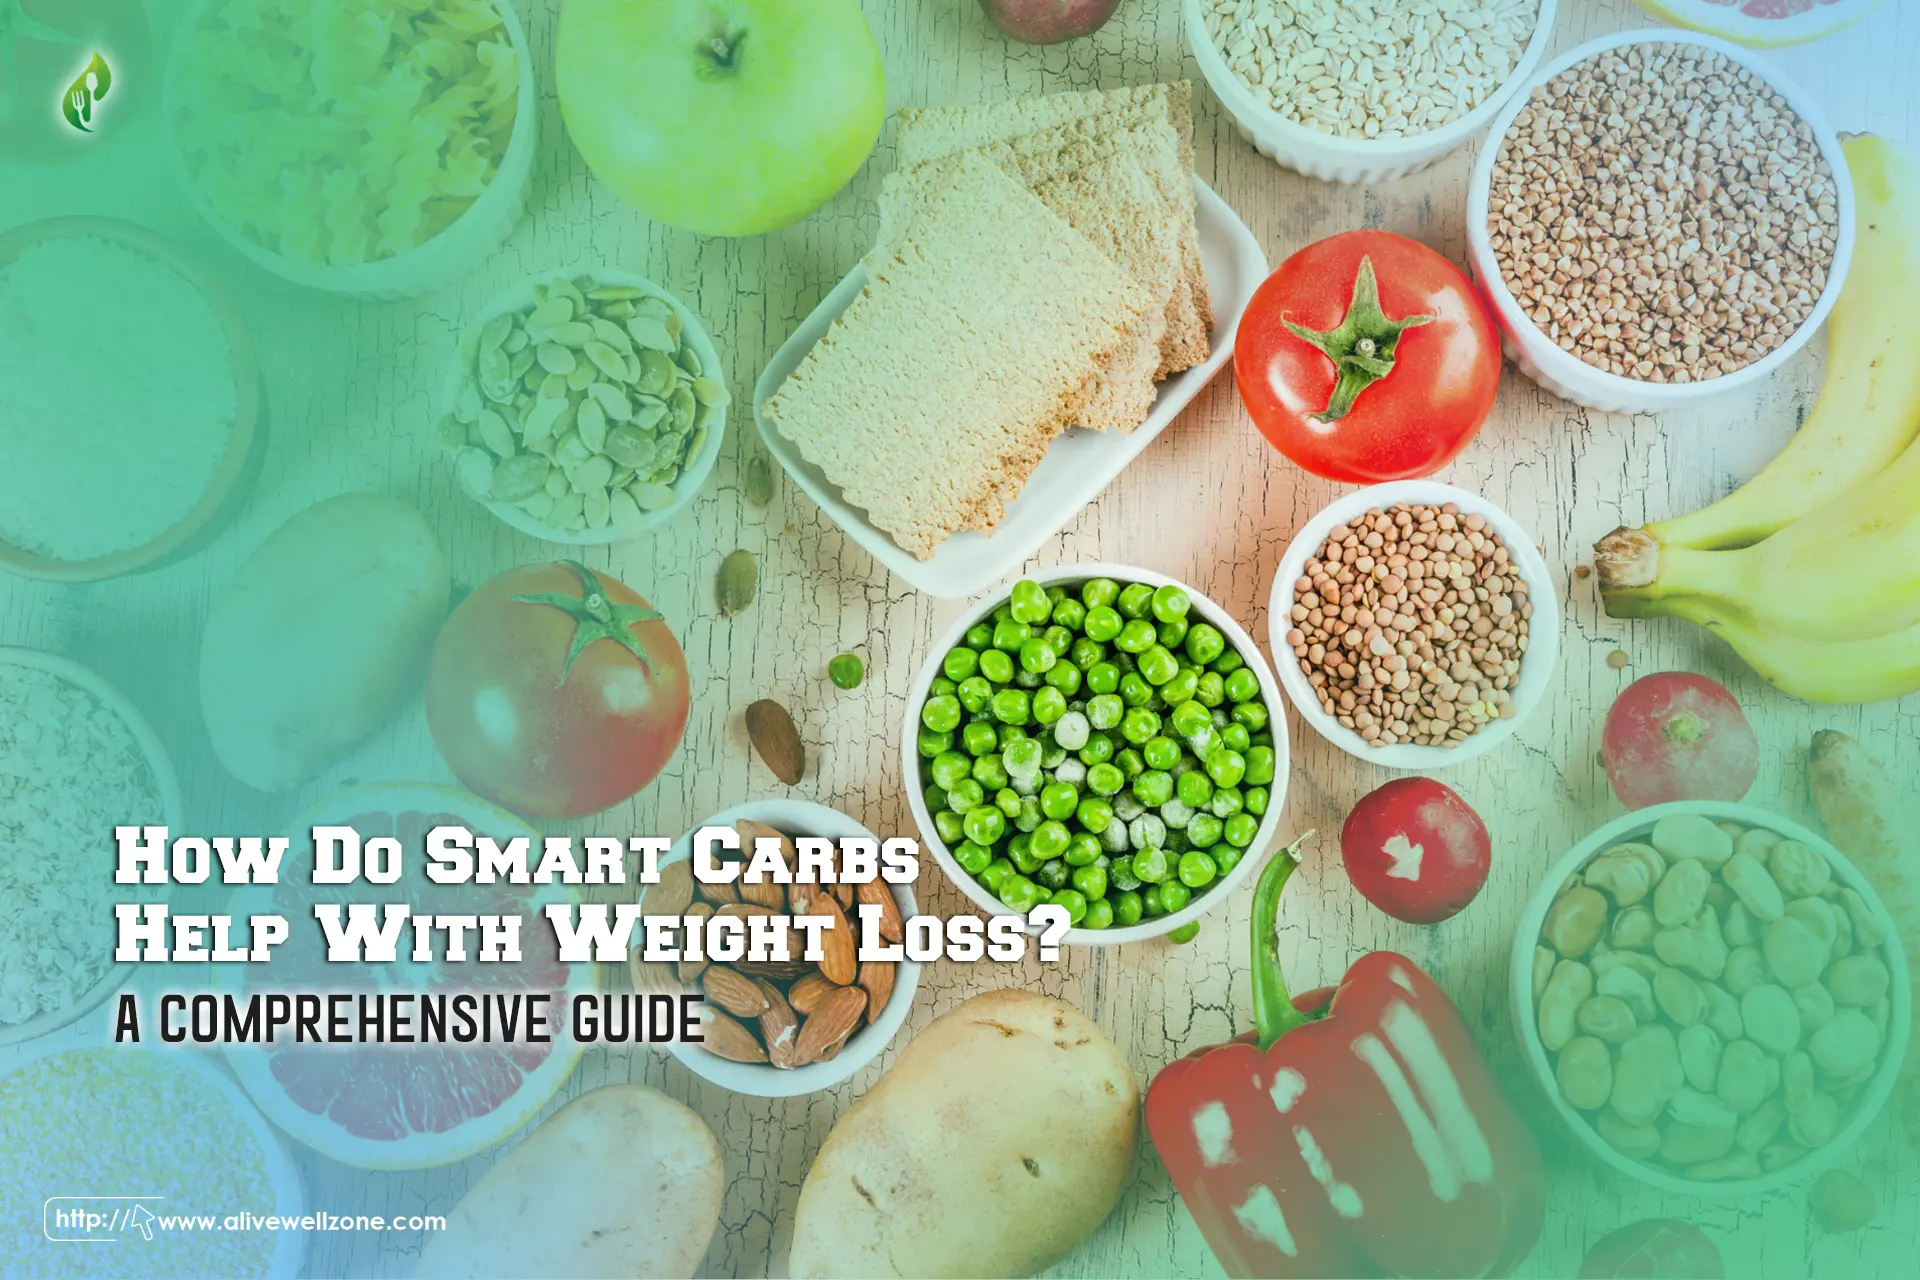 how do smart carbs help with weight loss?